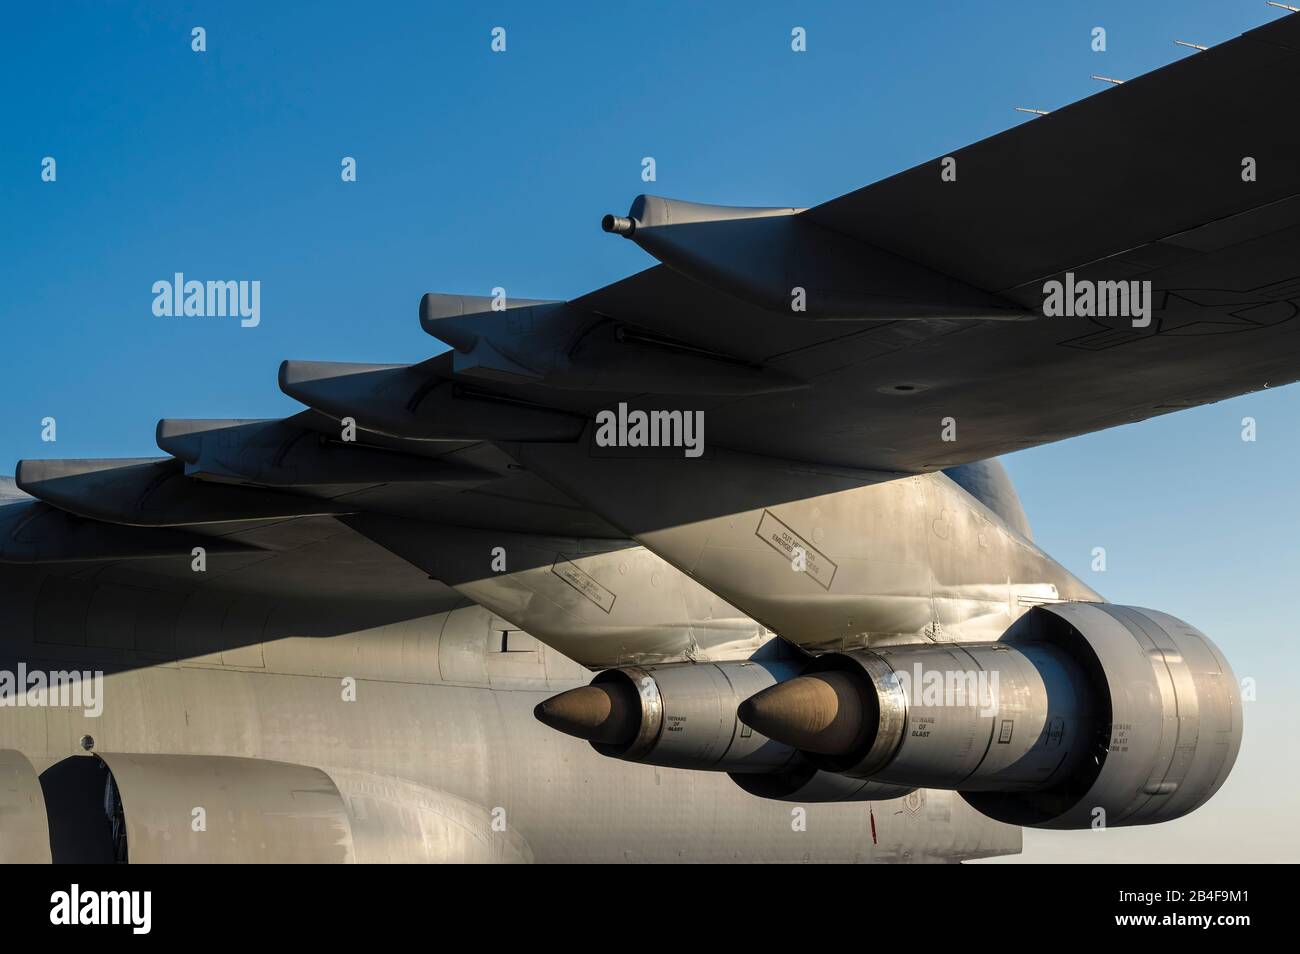 Military aircraft Galaxy C5, detail, engines. Stock Photo